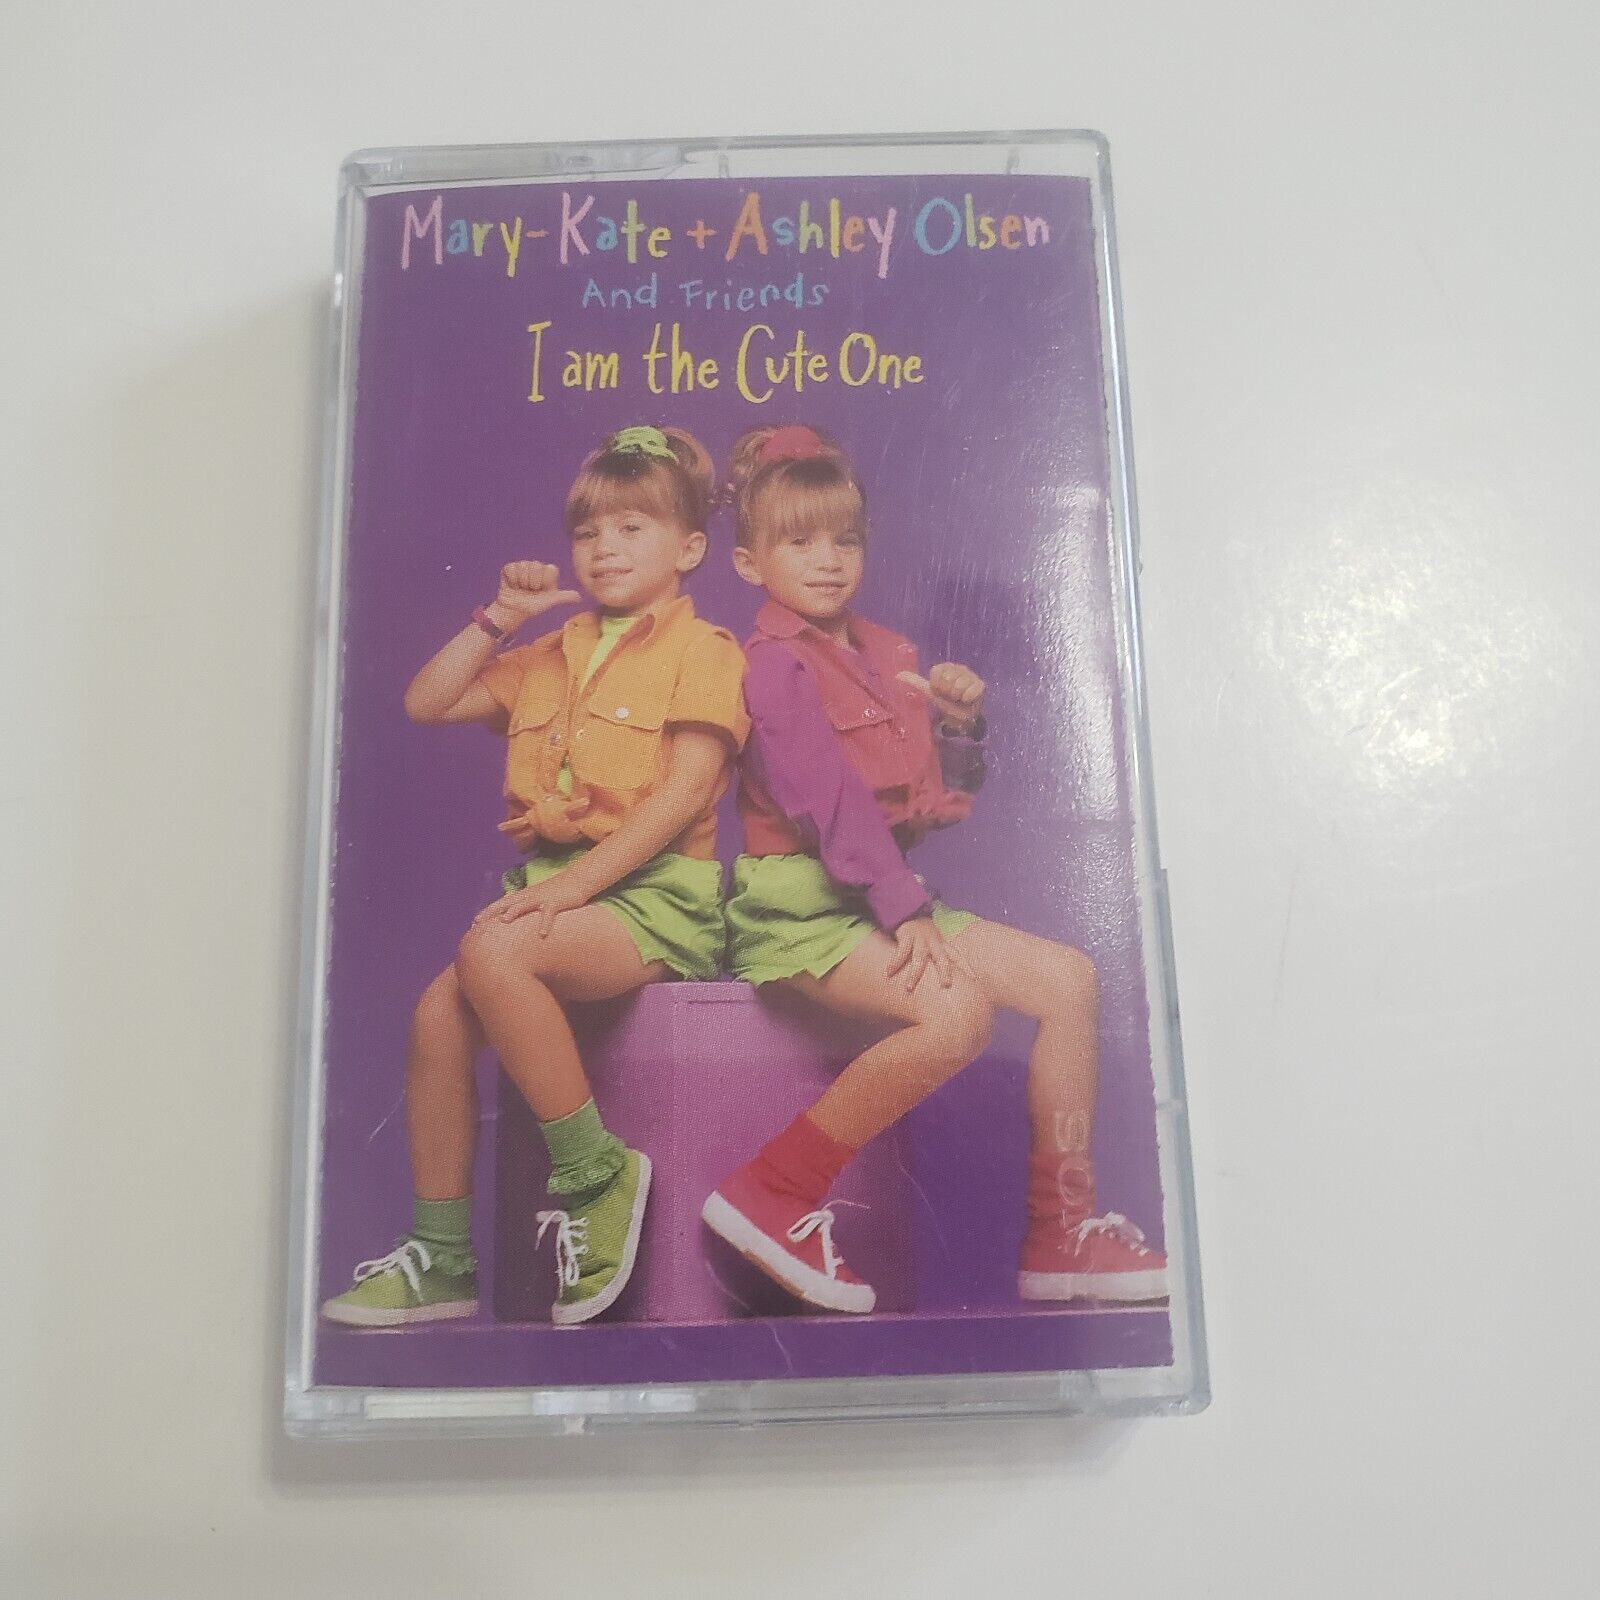 Mary Kate + Ashley Olsen I Am the Cute One  Cassette Tape 1993 Zoom Express USA